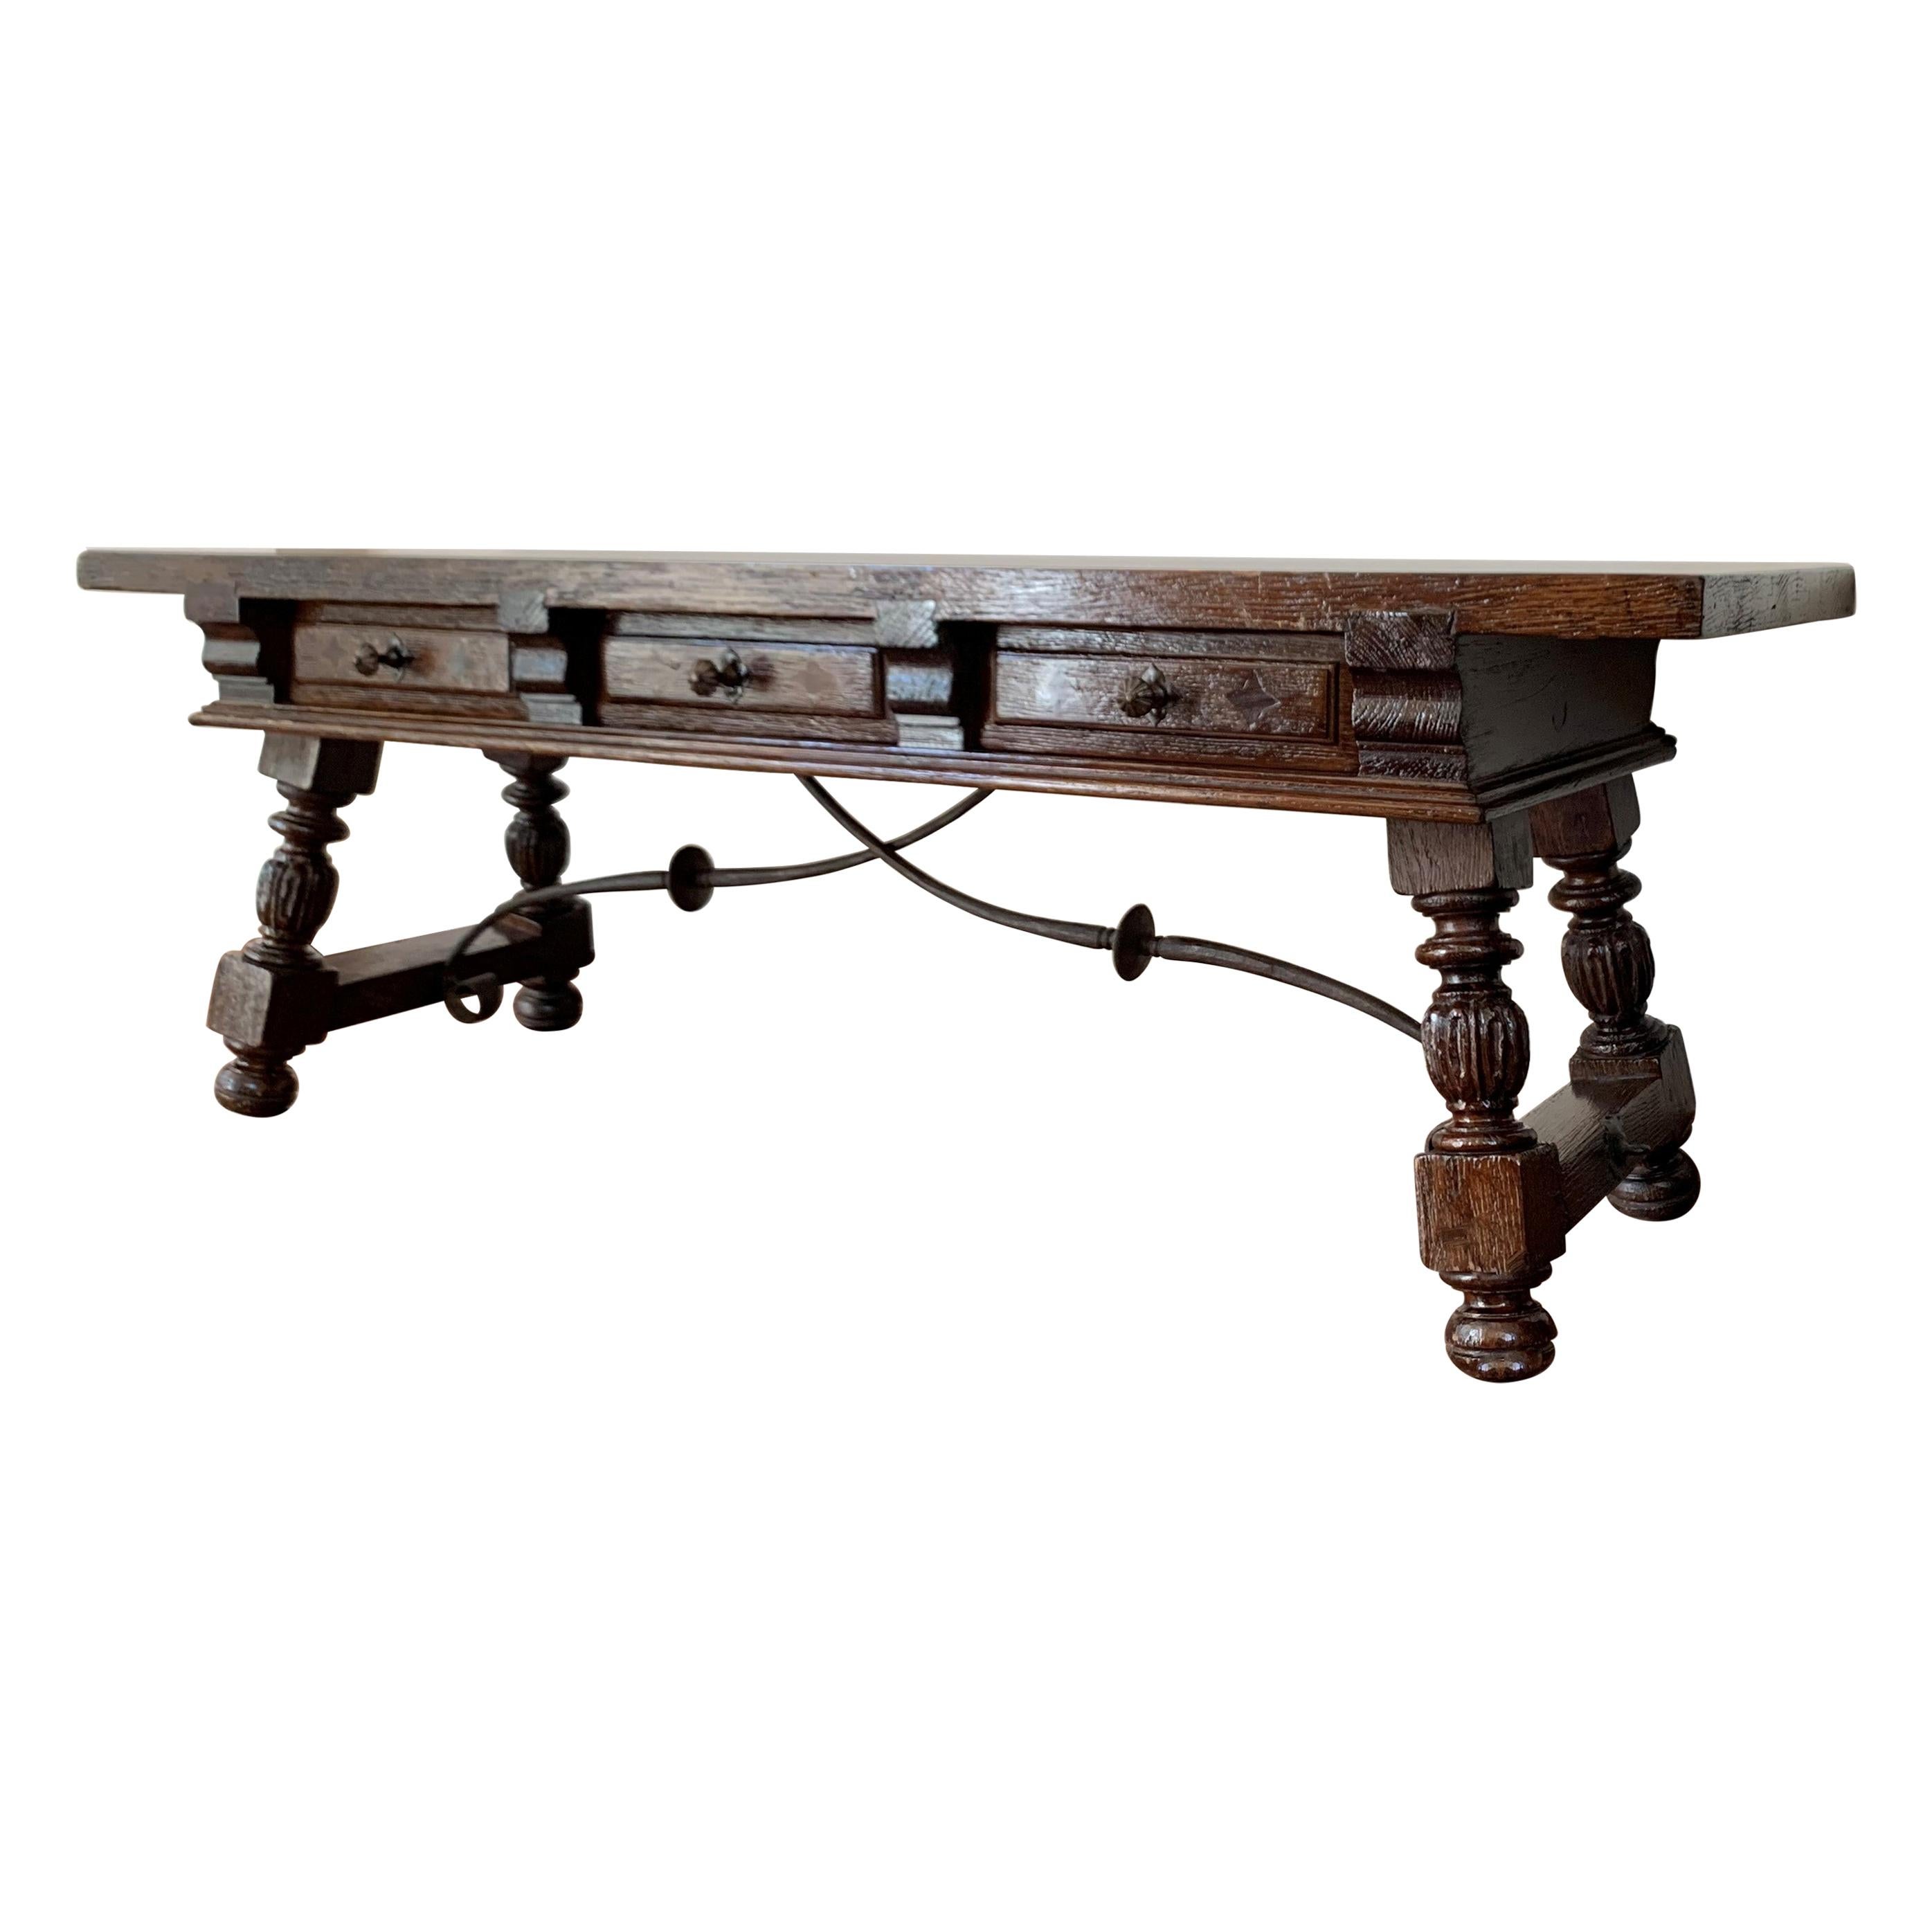 Spanish Bench or Low Console Table with Marquetry Drawers and Iron Stretcher